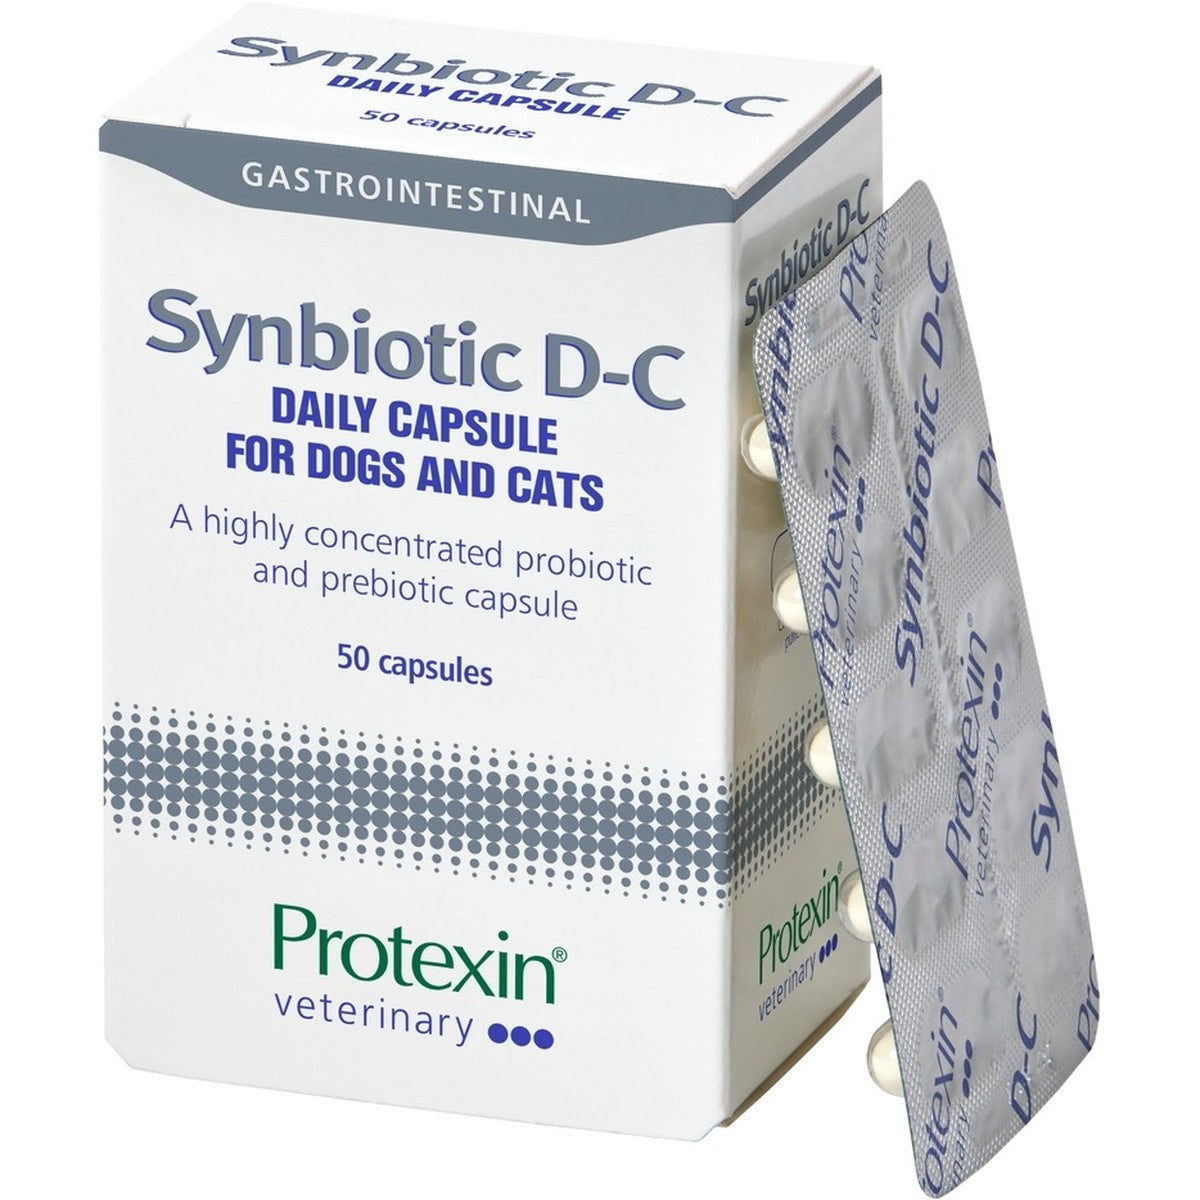 Protexin Synbiotic D-C Capsules for Dogs & Cats